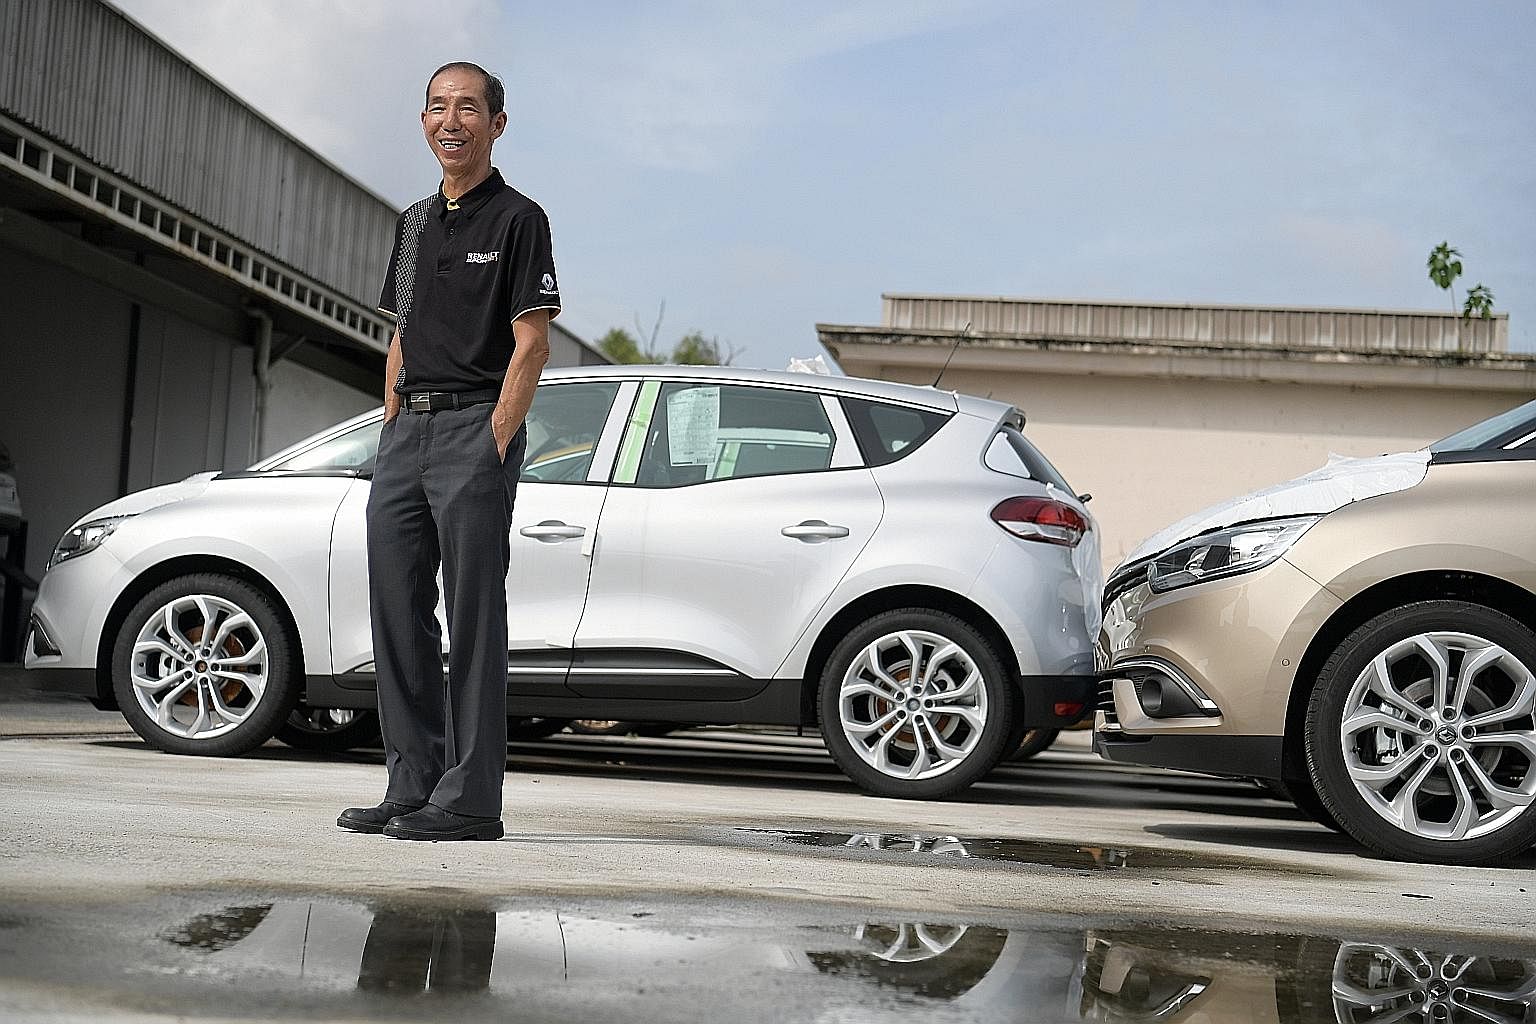 Mr Tan Leng Buck, 68, also known as Uncle Heng, has worked hard as a spray-painter and car washer for nearly 45 years. He is now a driver for Renault - his first stable job that pays him regular CPF.